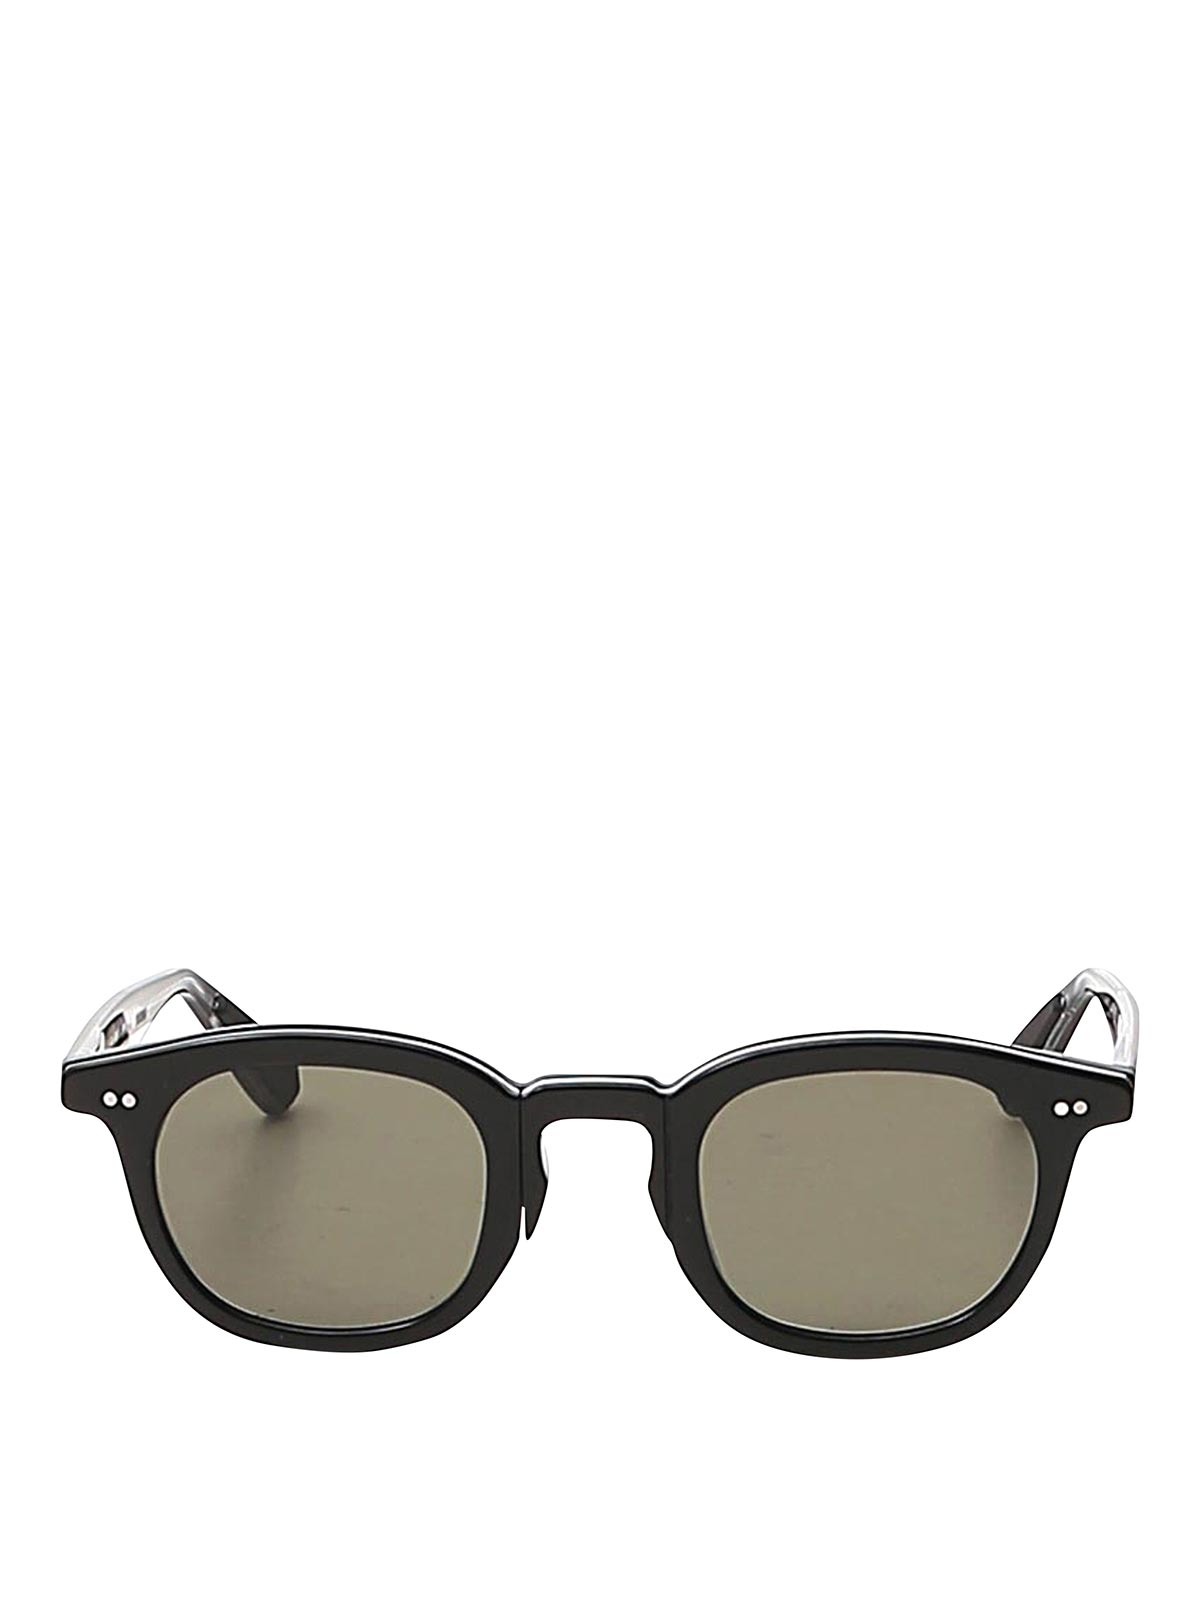 Movitra Sunglasses In Black With Green Lenses